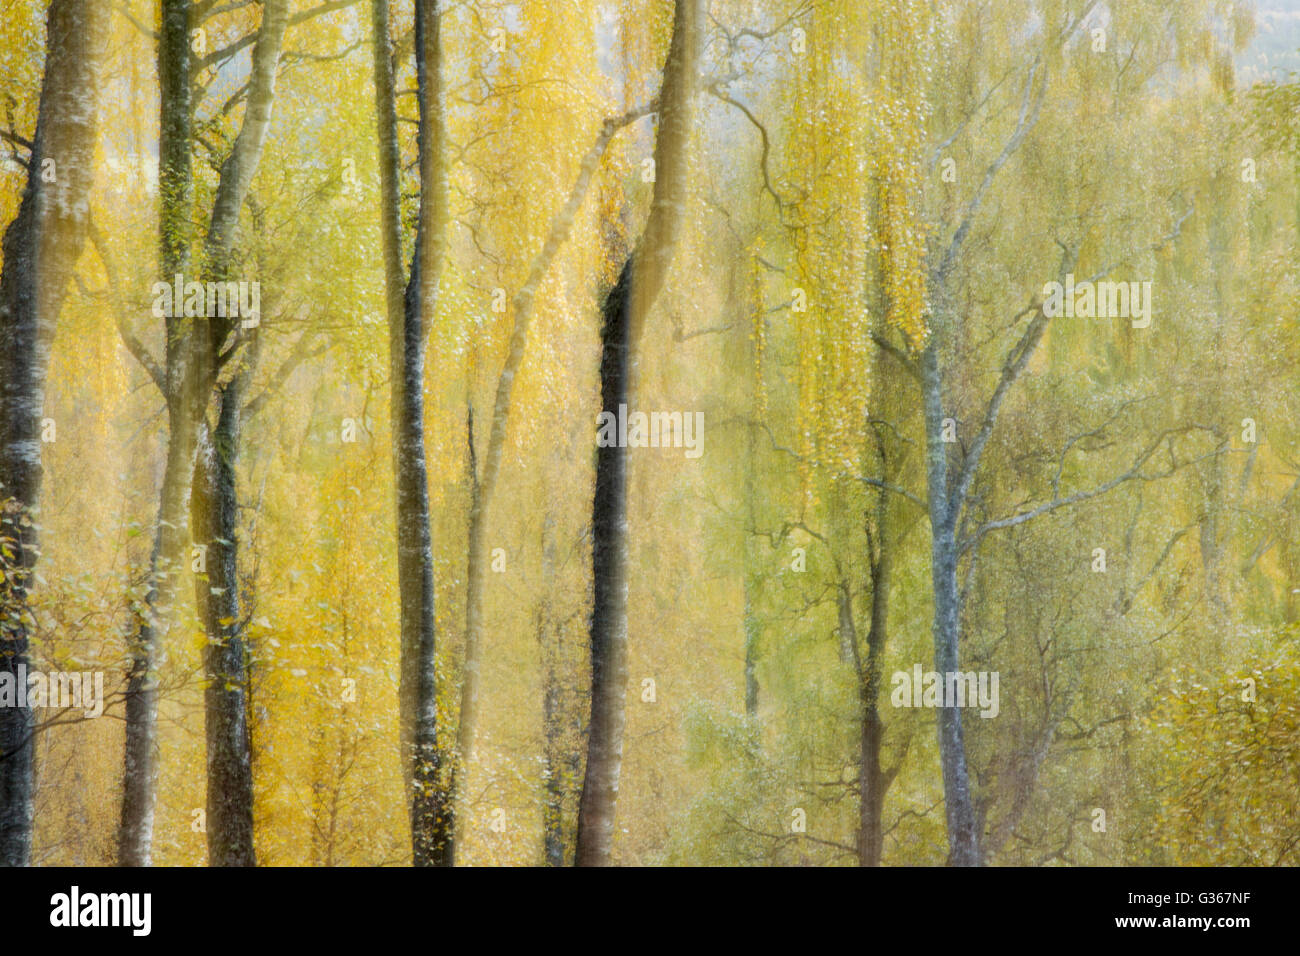 Silver birch woodland, abstract soft focus dream like effect, showing autumn colours Stock Photo